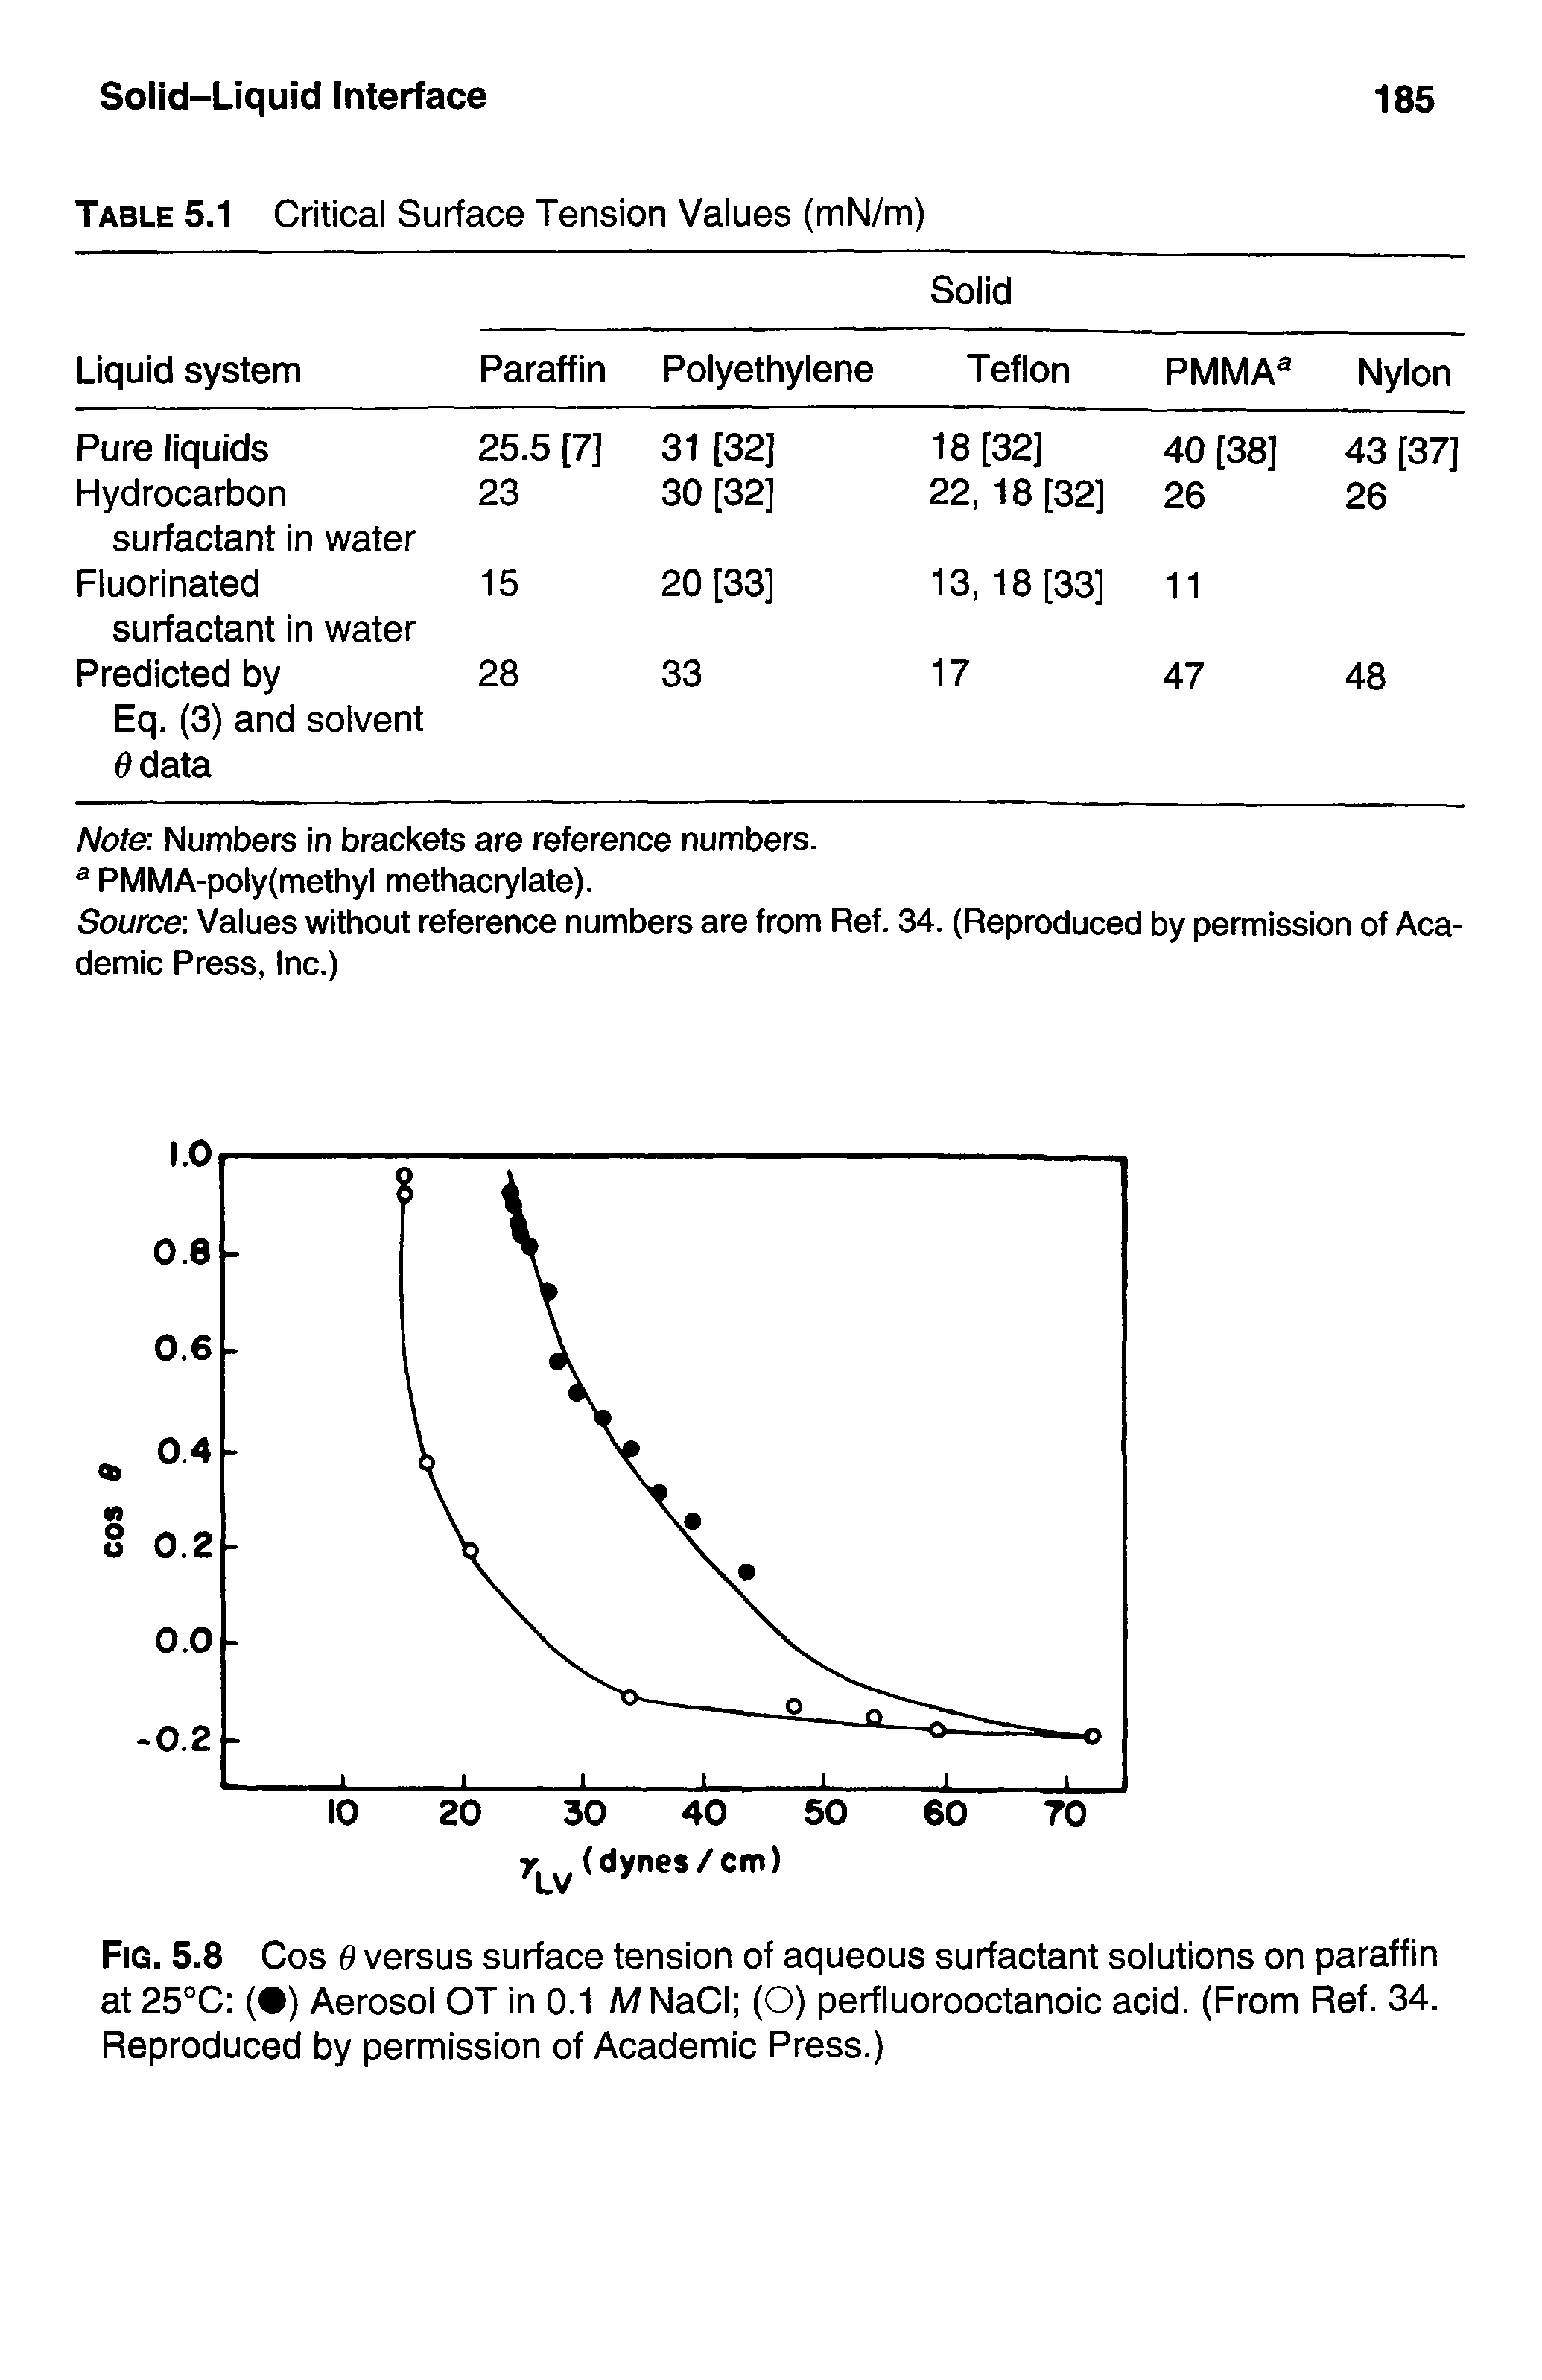 Fig. 5.8 Cos e versus surface tension of aqueous surfactant solutions on paraffin at 25°C ( ) Aerosol OT in 0.1 MNaCI (O) perfluorooctanoic acid. (From Ref. 34. Reproduced by permission of Academic Press.)...